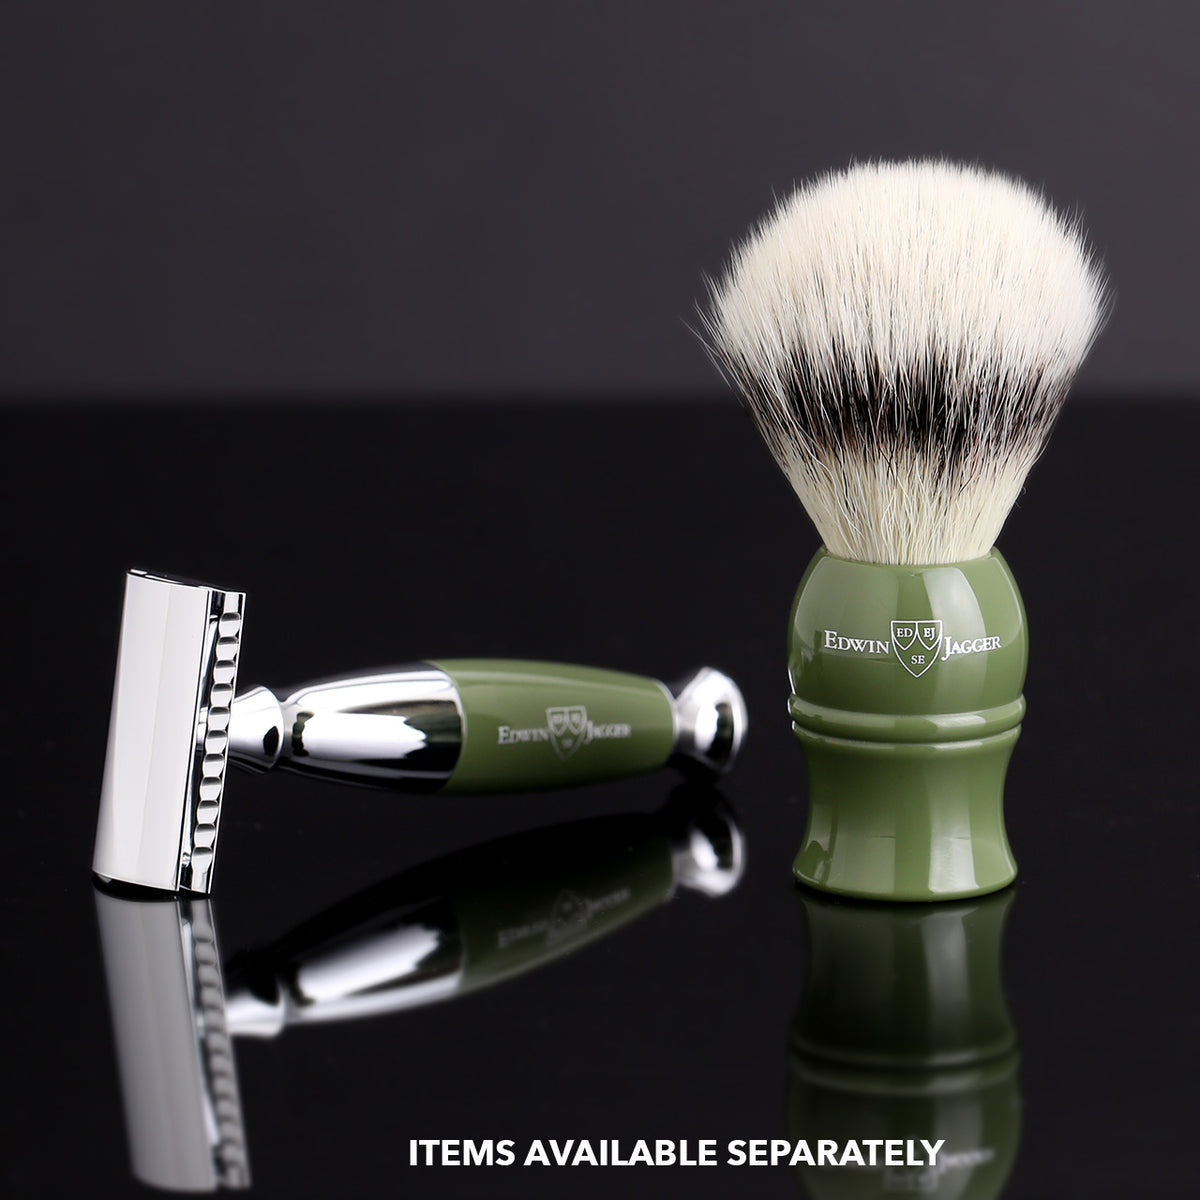 These shaving brushes match nicely with the Diffusion 36 Safety Razors (items available separately)